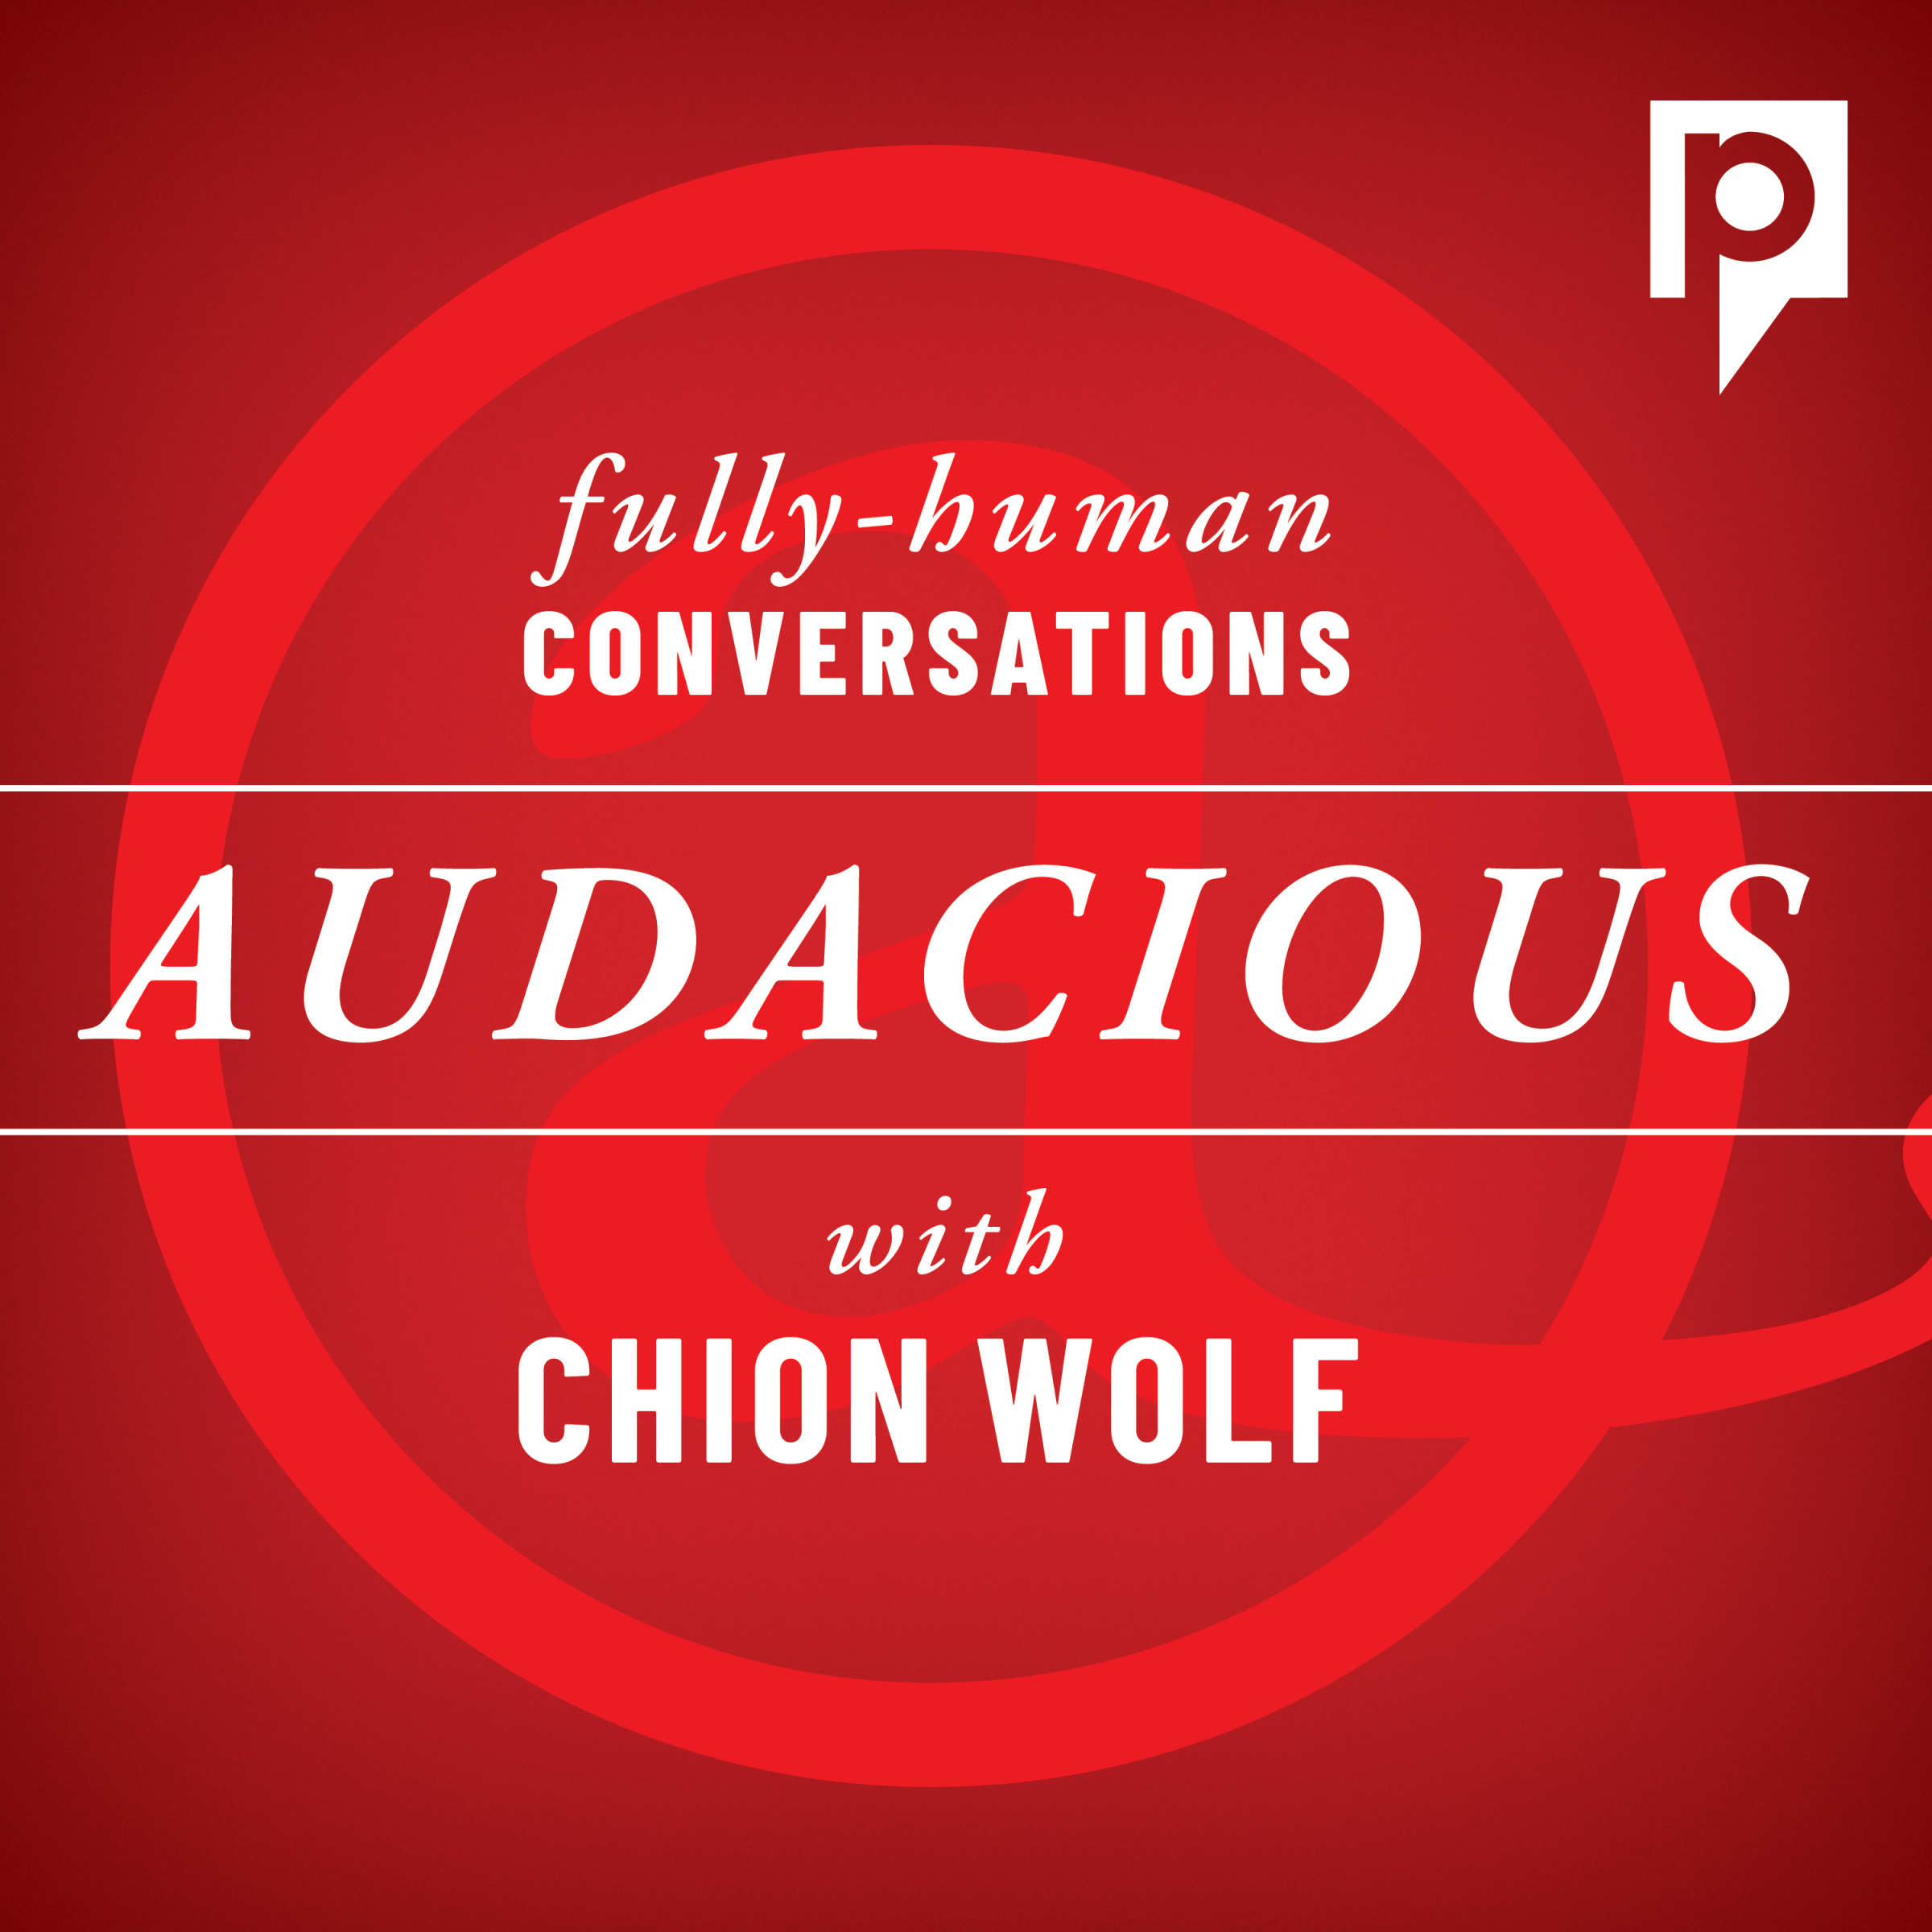 Audacious with Chion Wolf highlights the uncommon experiences of everyday people – asking the hardest, most uncomfortable questions. With curiosity and compassion, Connecticut Public producer and host Chion Wolf digs deeper, encouraging listeners to ask hard questions in their own lives.

